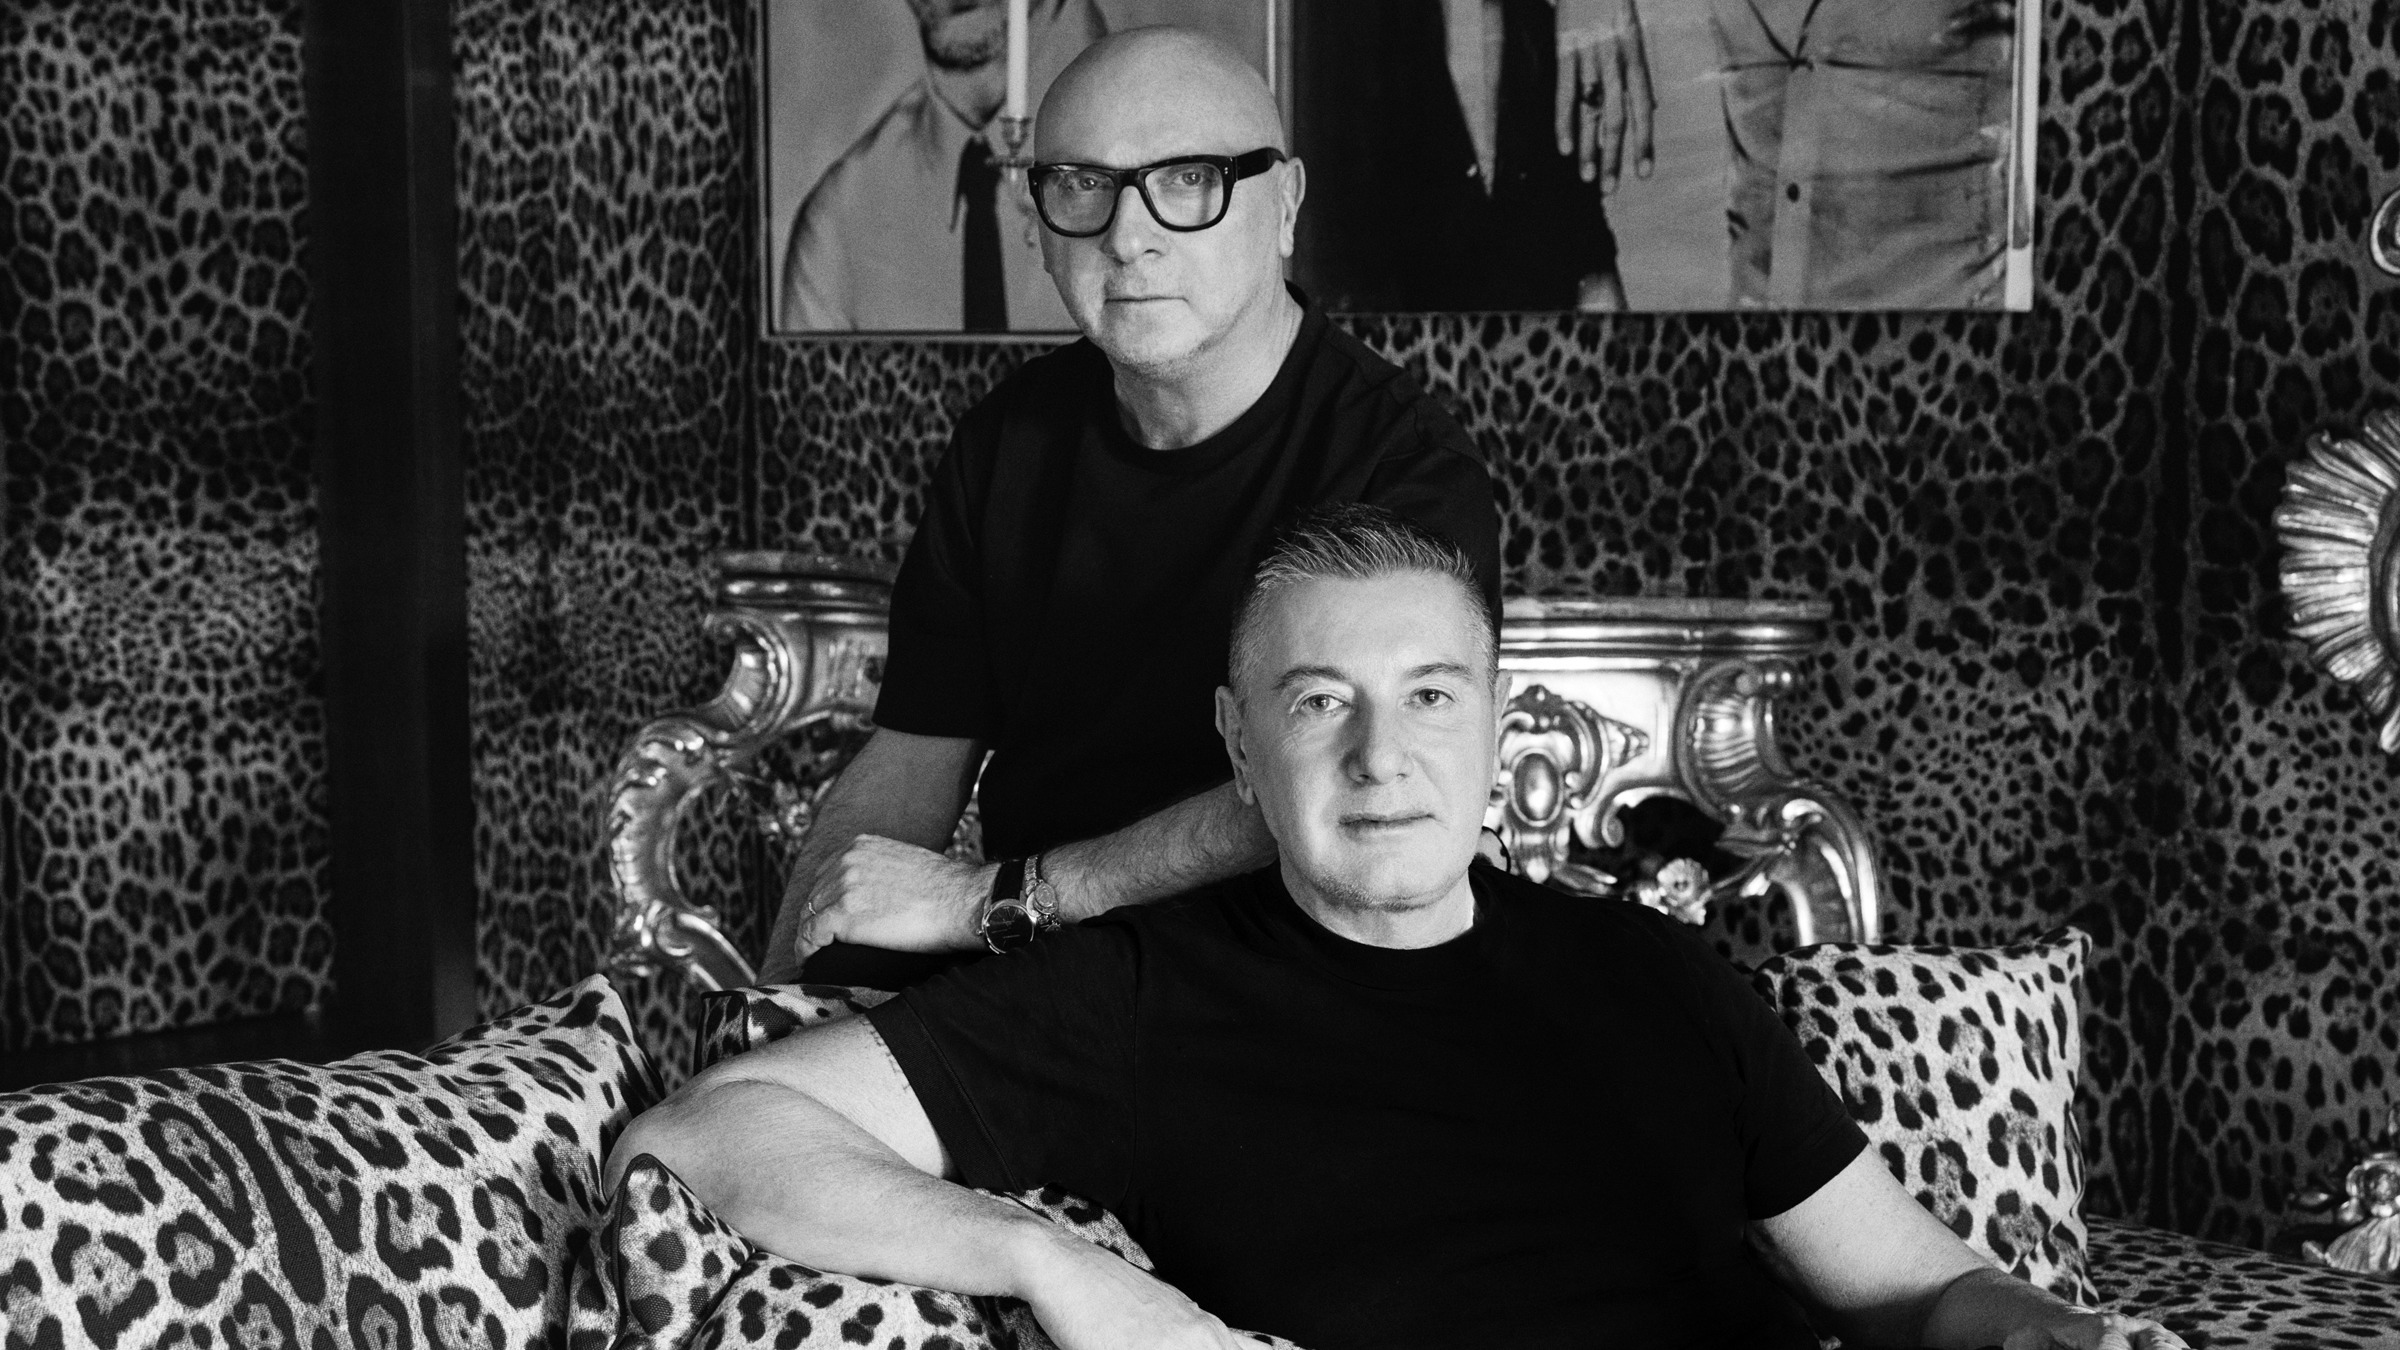 Dolce & Gabbana have got designs on your home | Financial Times